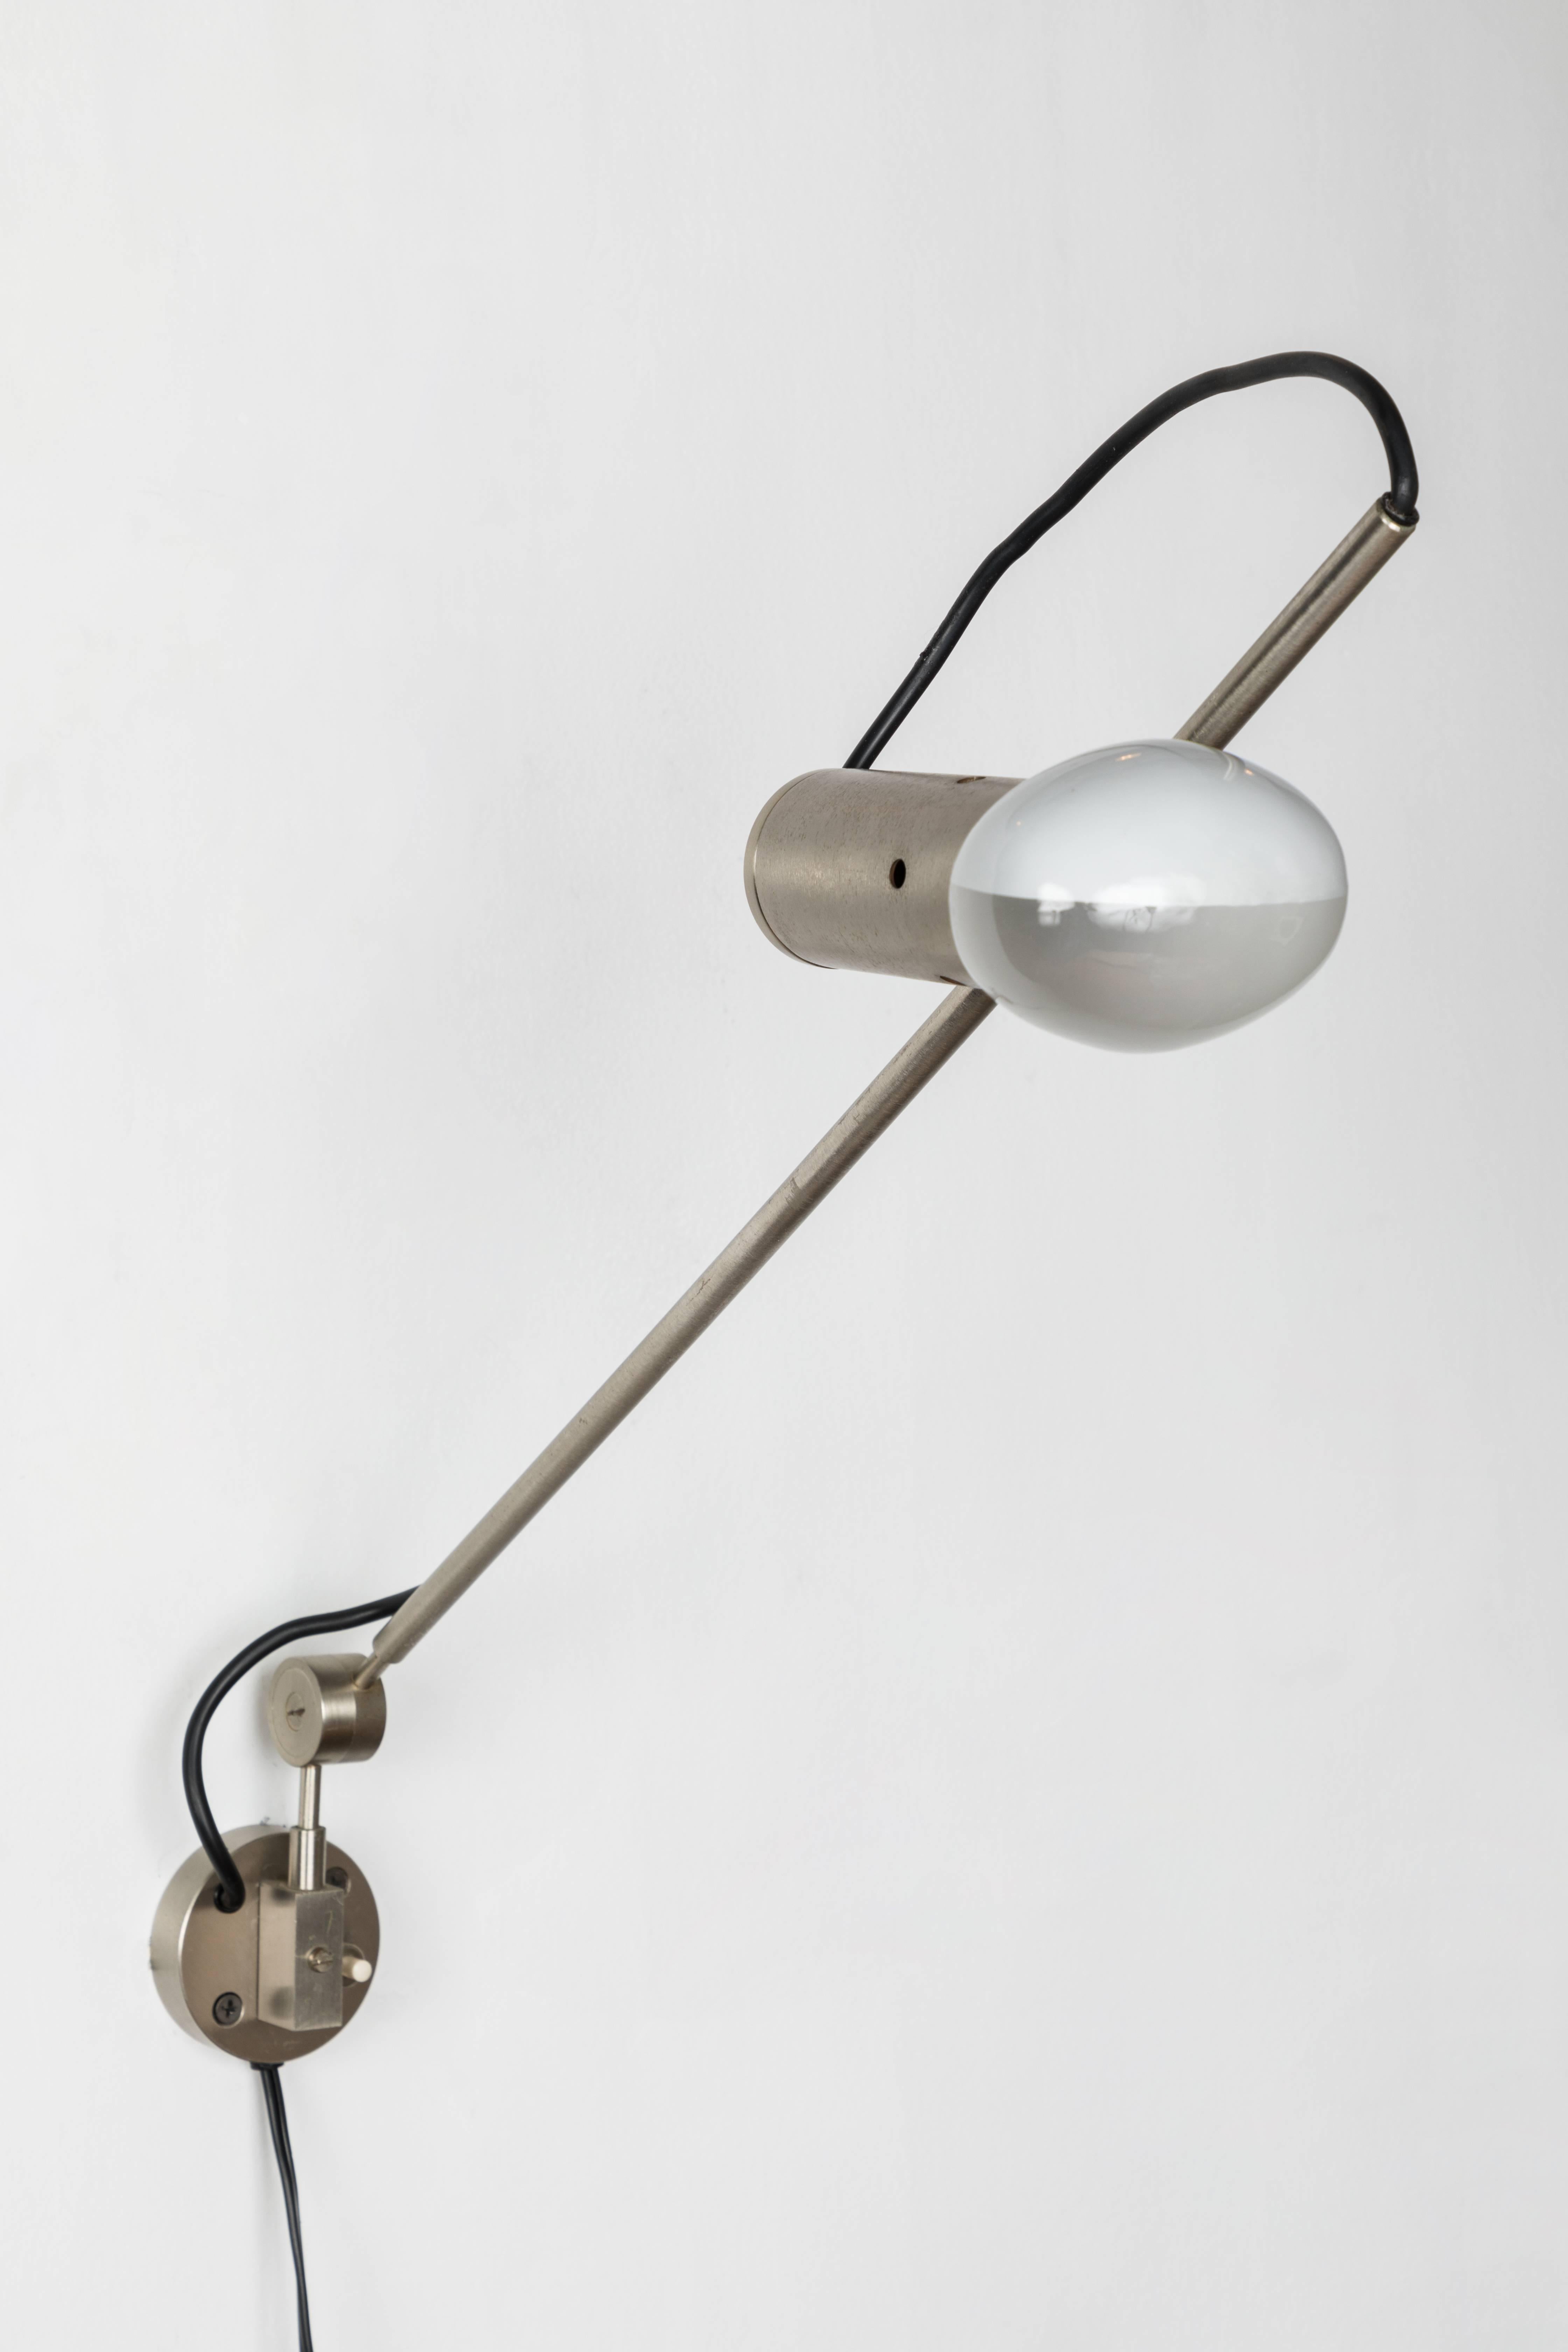 1955 Tito Agnoli model 194 wall light for O-Luce. An extremely rare matched pair executed in nickeled metal. One of the most refined Minimalist Italian designs of the midcentury. A highly adjustable wall light, the arms can be rotated up/down and